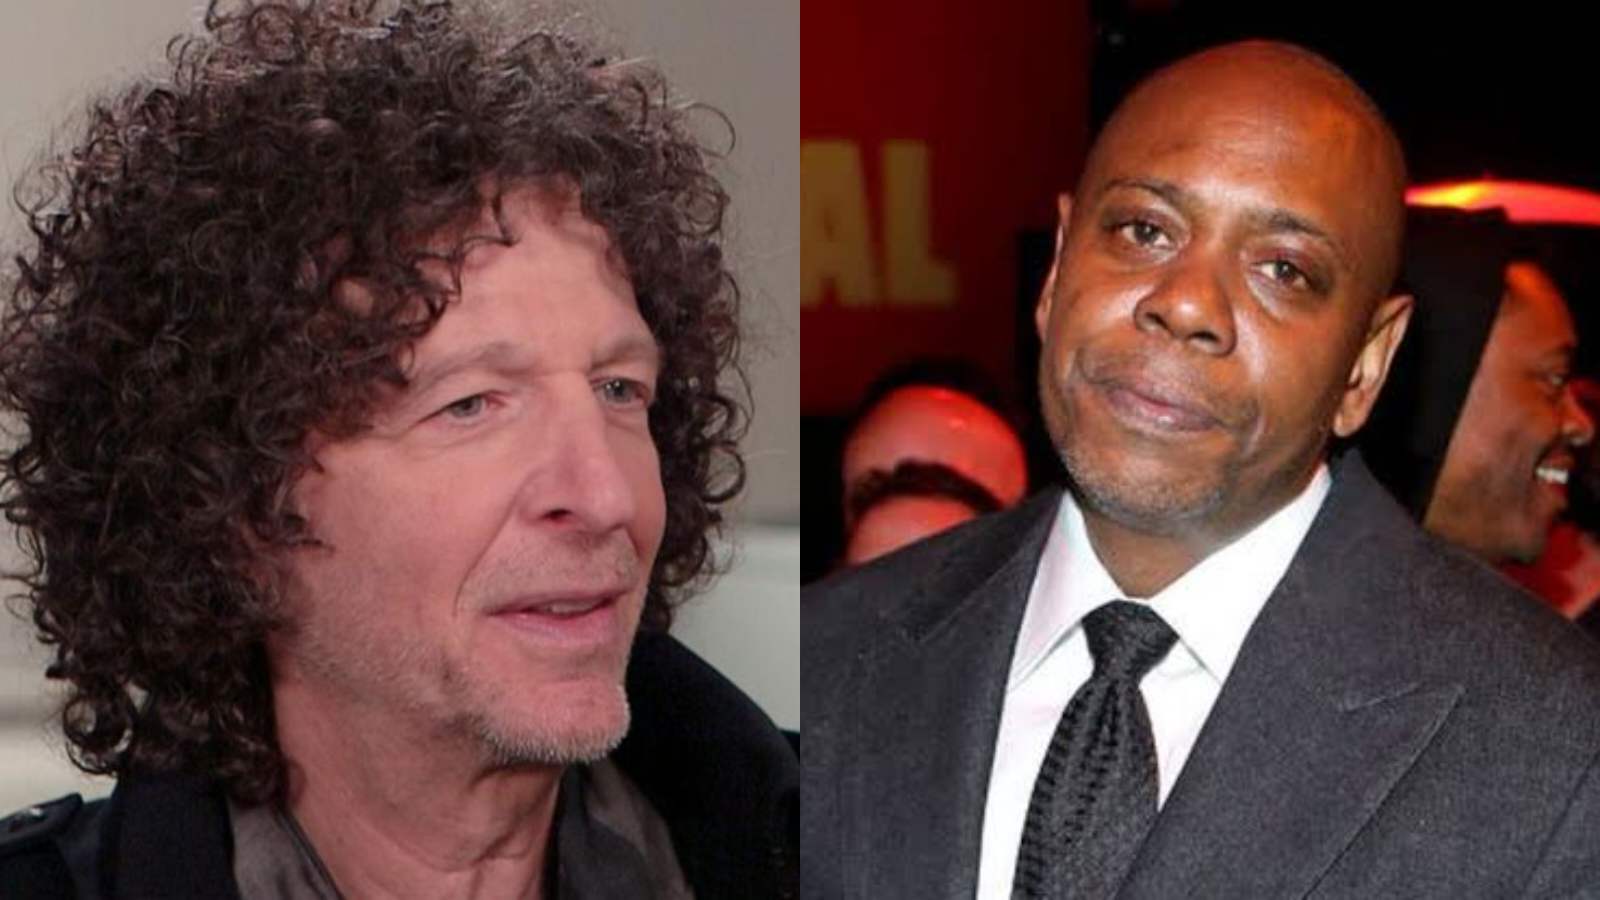 Howard Stern and Dave Chappelle